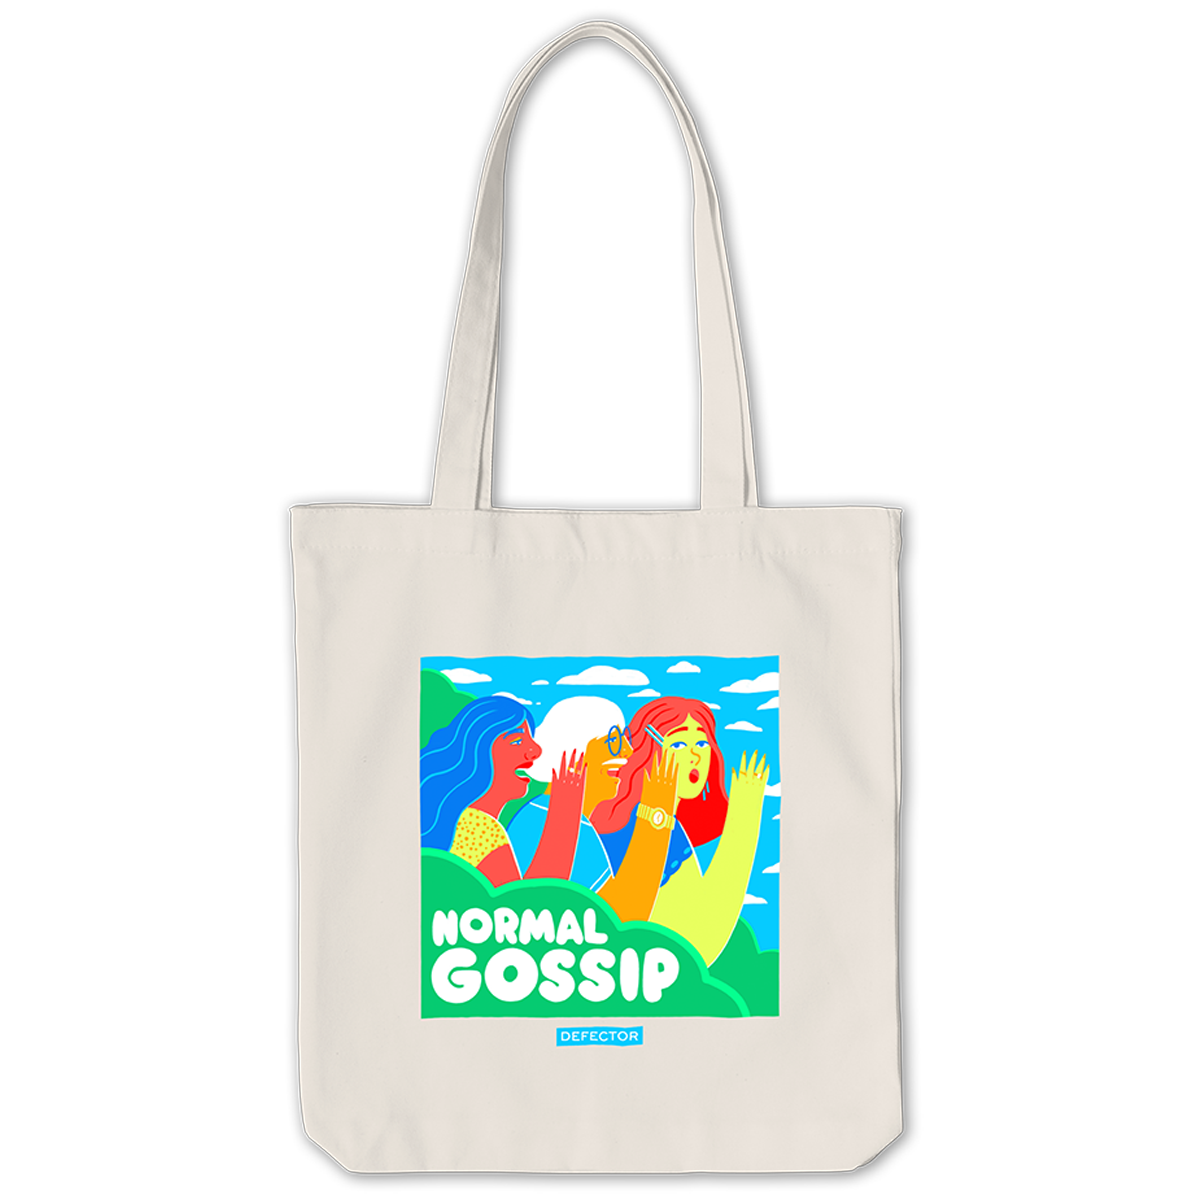 A tote bag with the Normal Gossip logo.